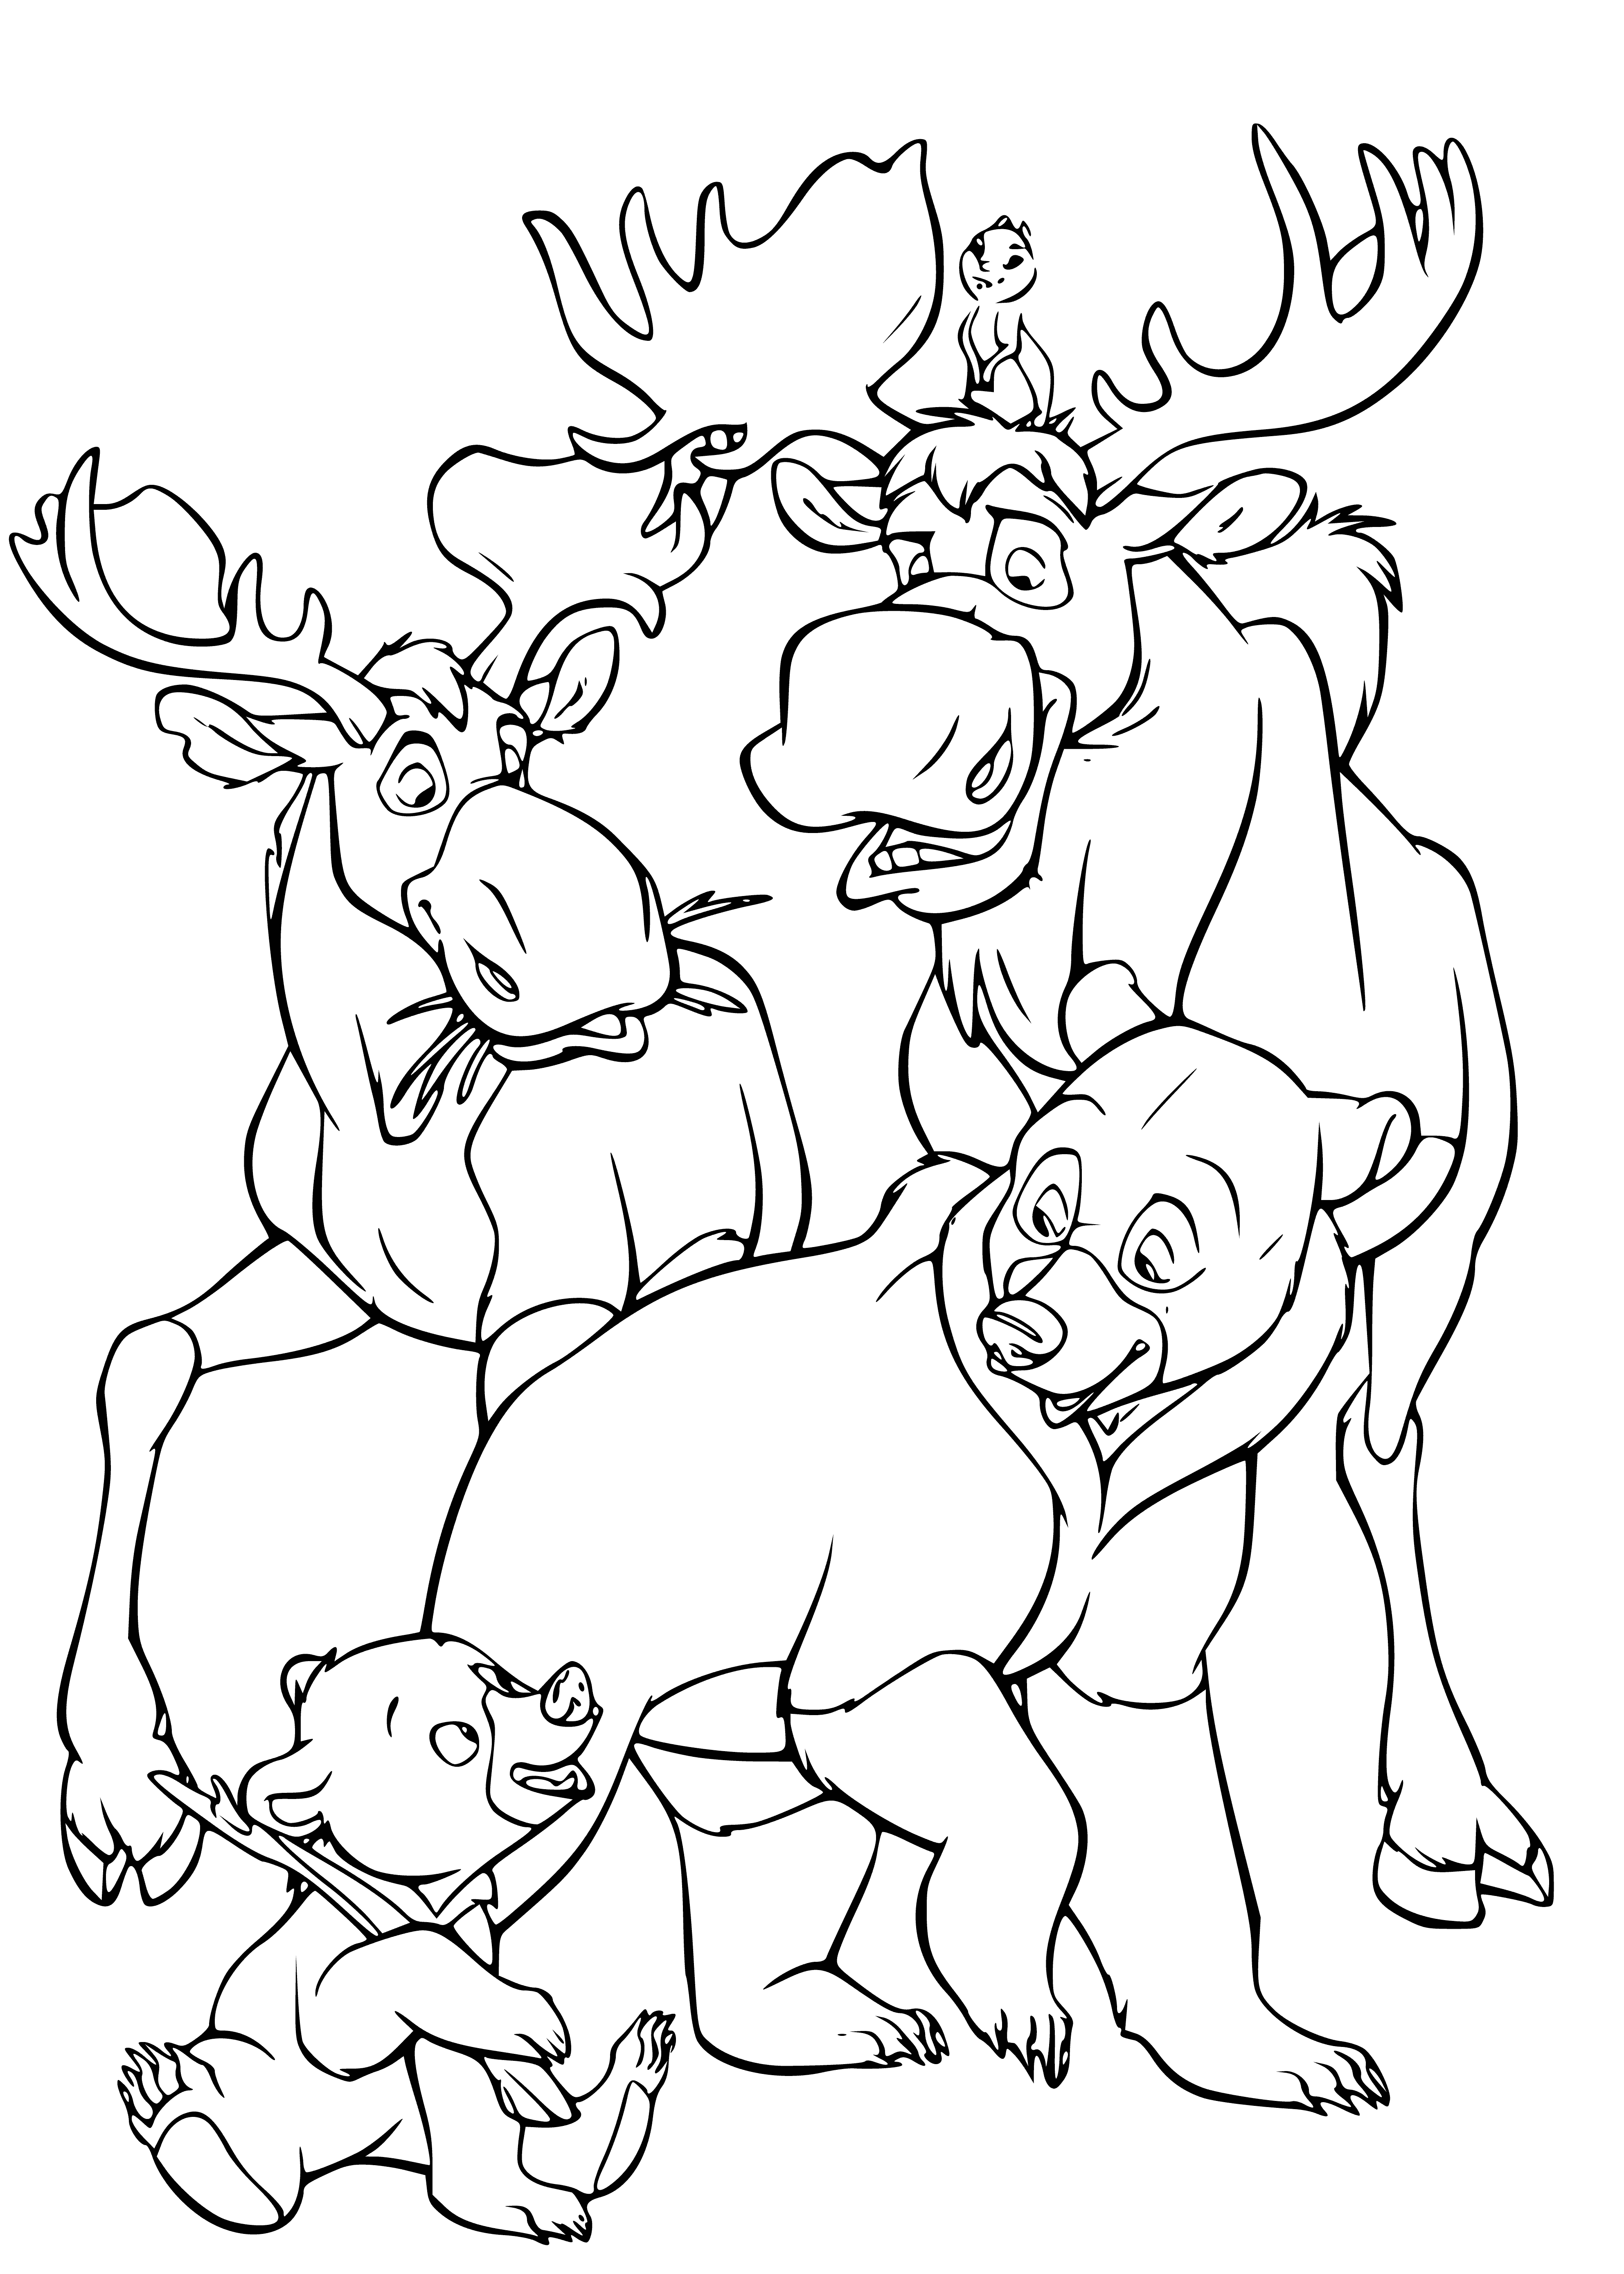 Catch and bears coloring page